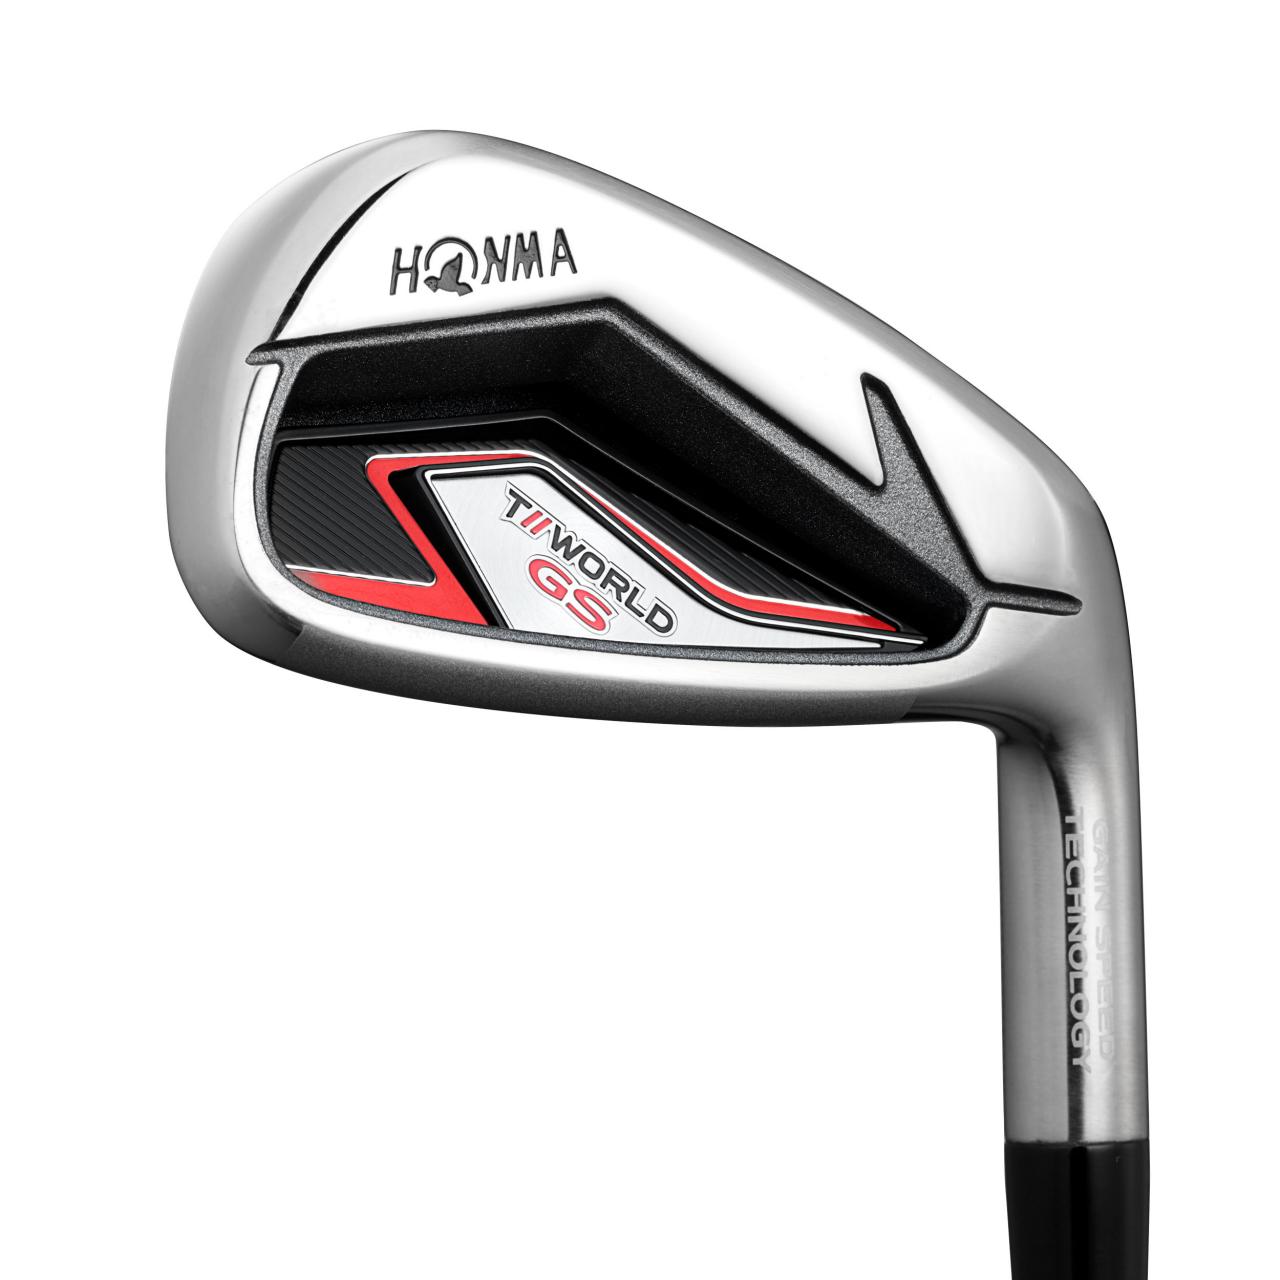 New Honma T//World GS woods, irons aims to help average golfers